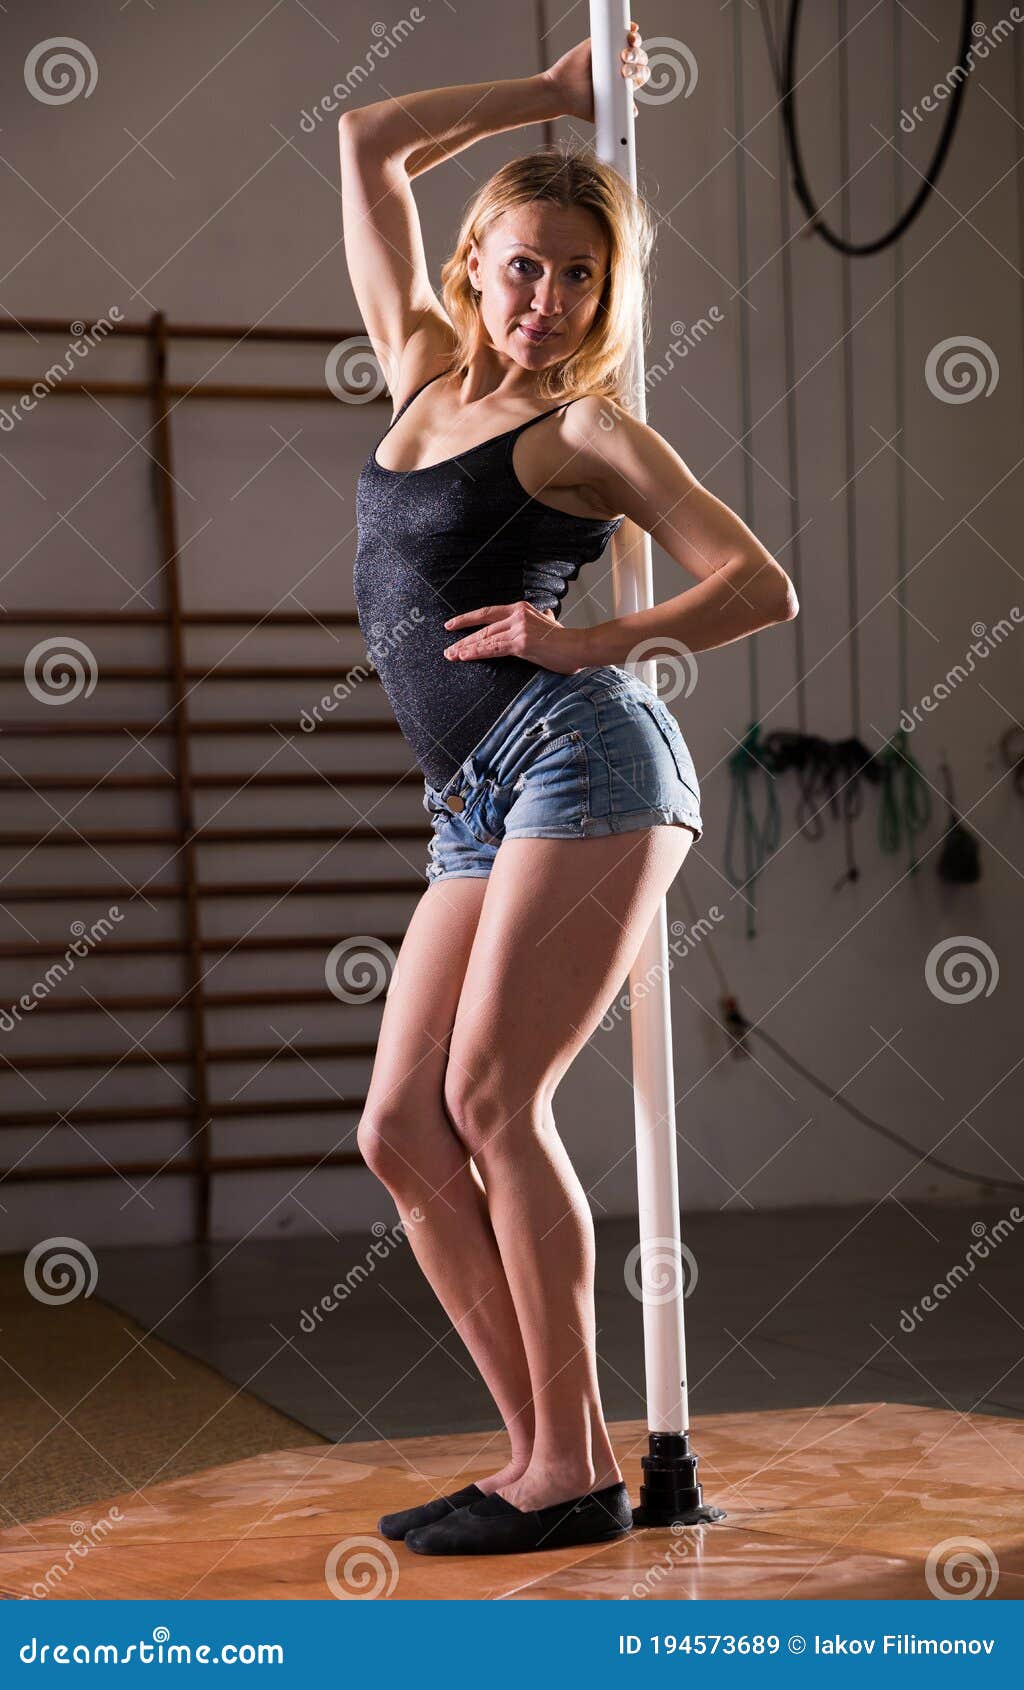 Young Woman In Denim Shorts Practicing Pole Dancing Stock Photo, Picture  and Royalty Free Image. Image 128252944.